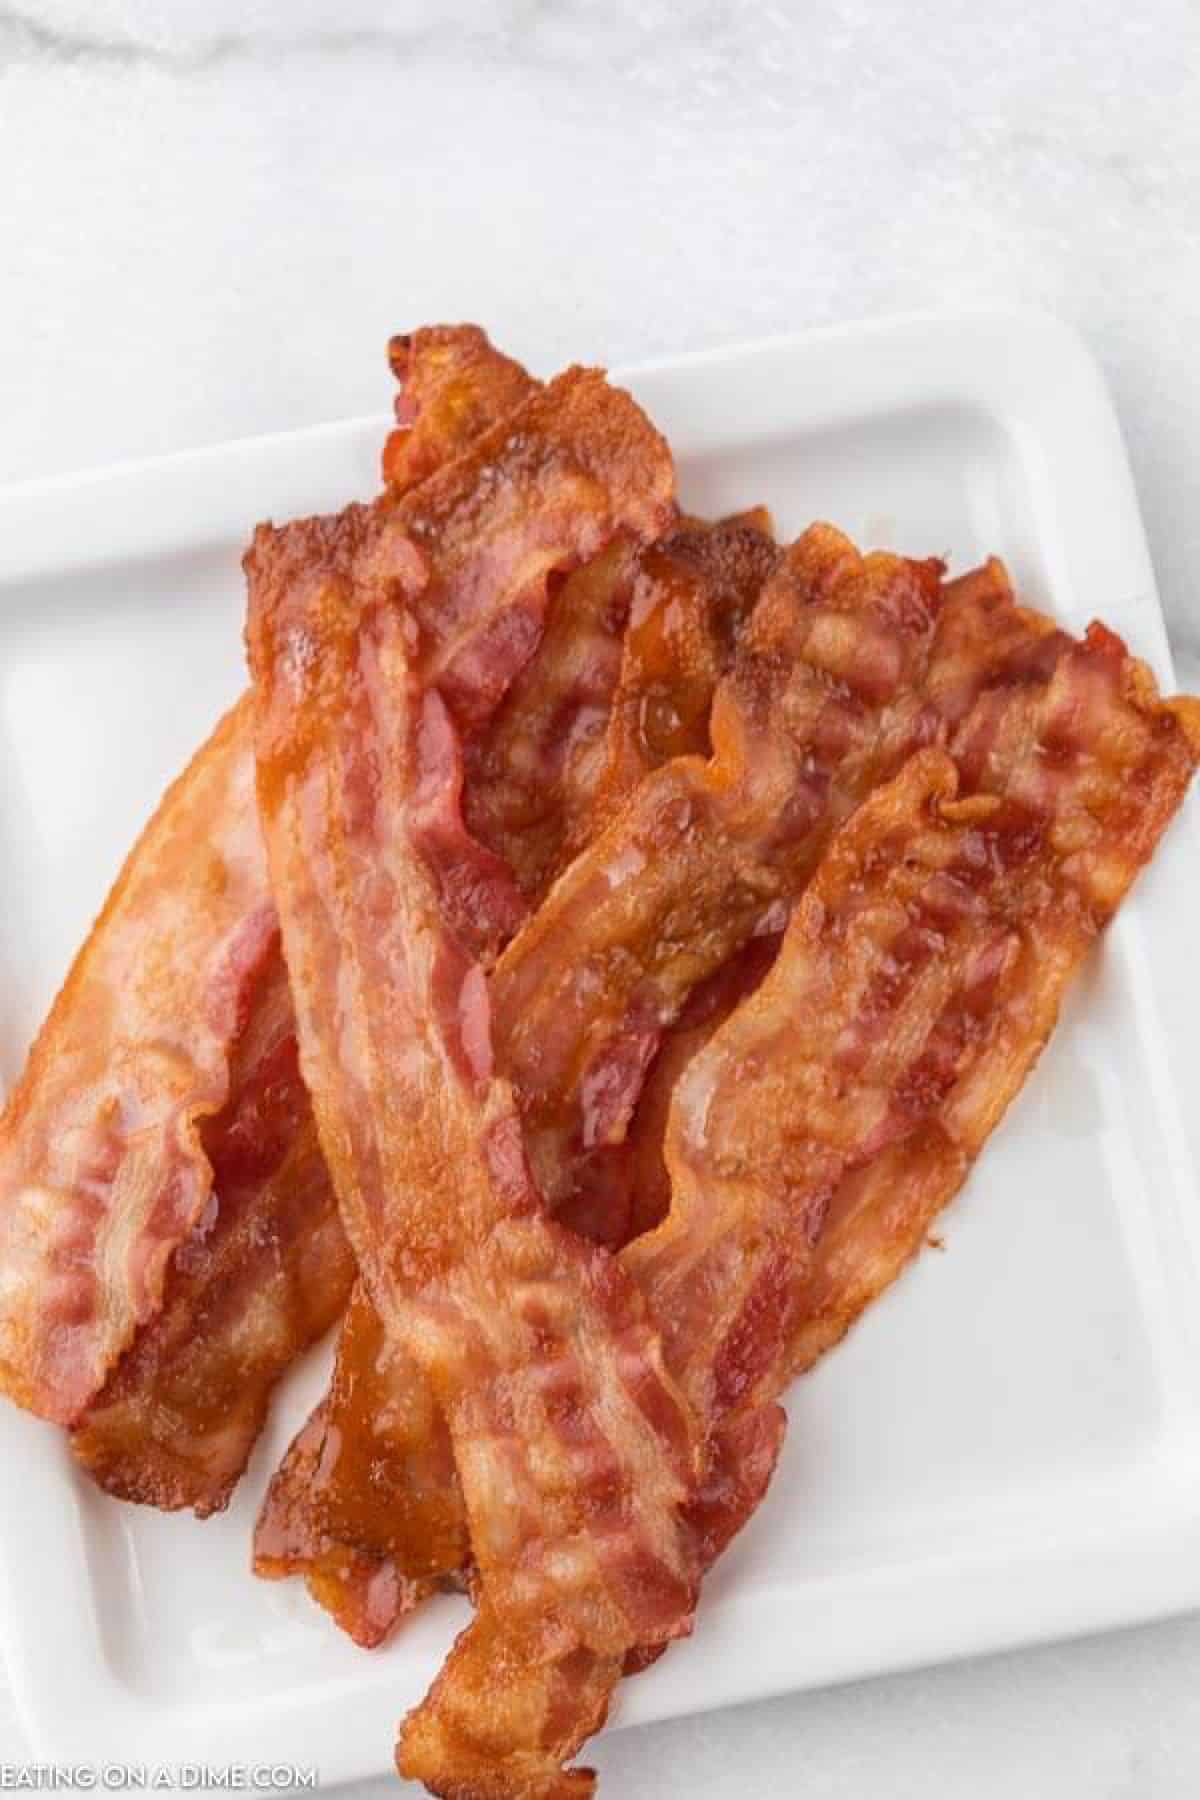 cooked bacon on plate